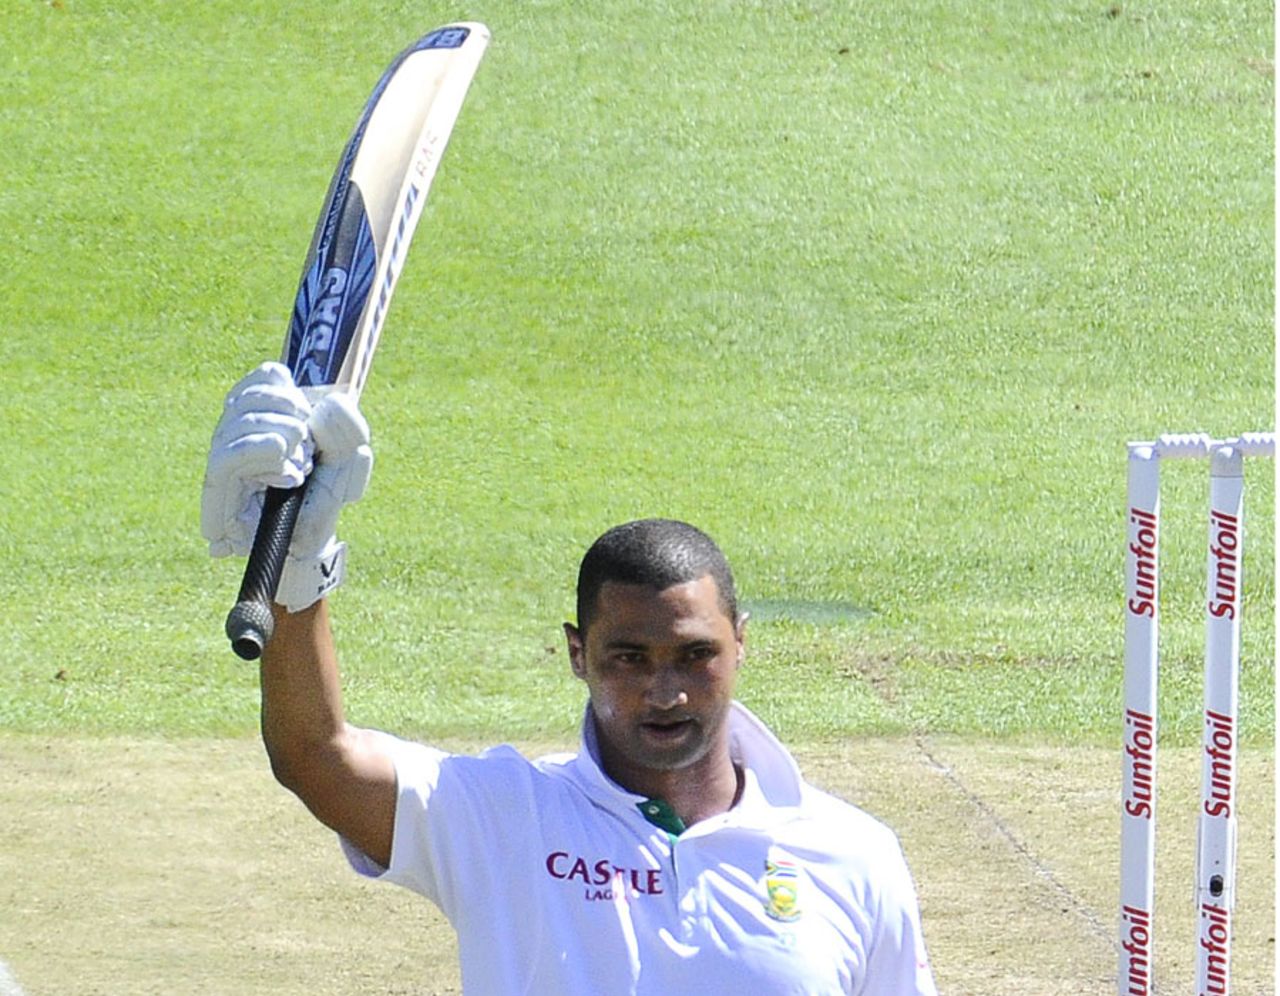 Alviro Petersen made his second Test century, South Africa v Sri Lanka, 3rd Test, Cape Town, 1st day, January 3, 2012